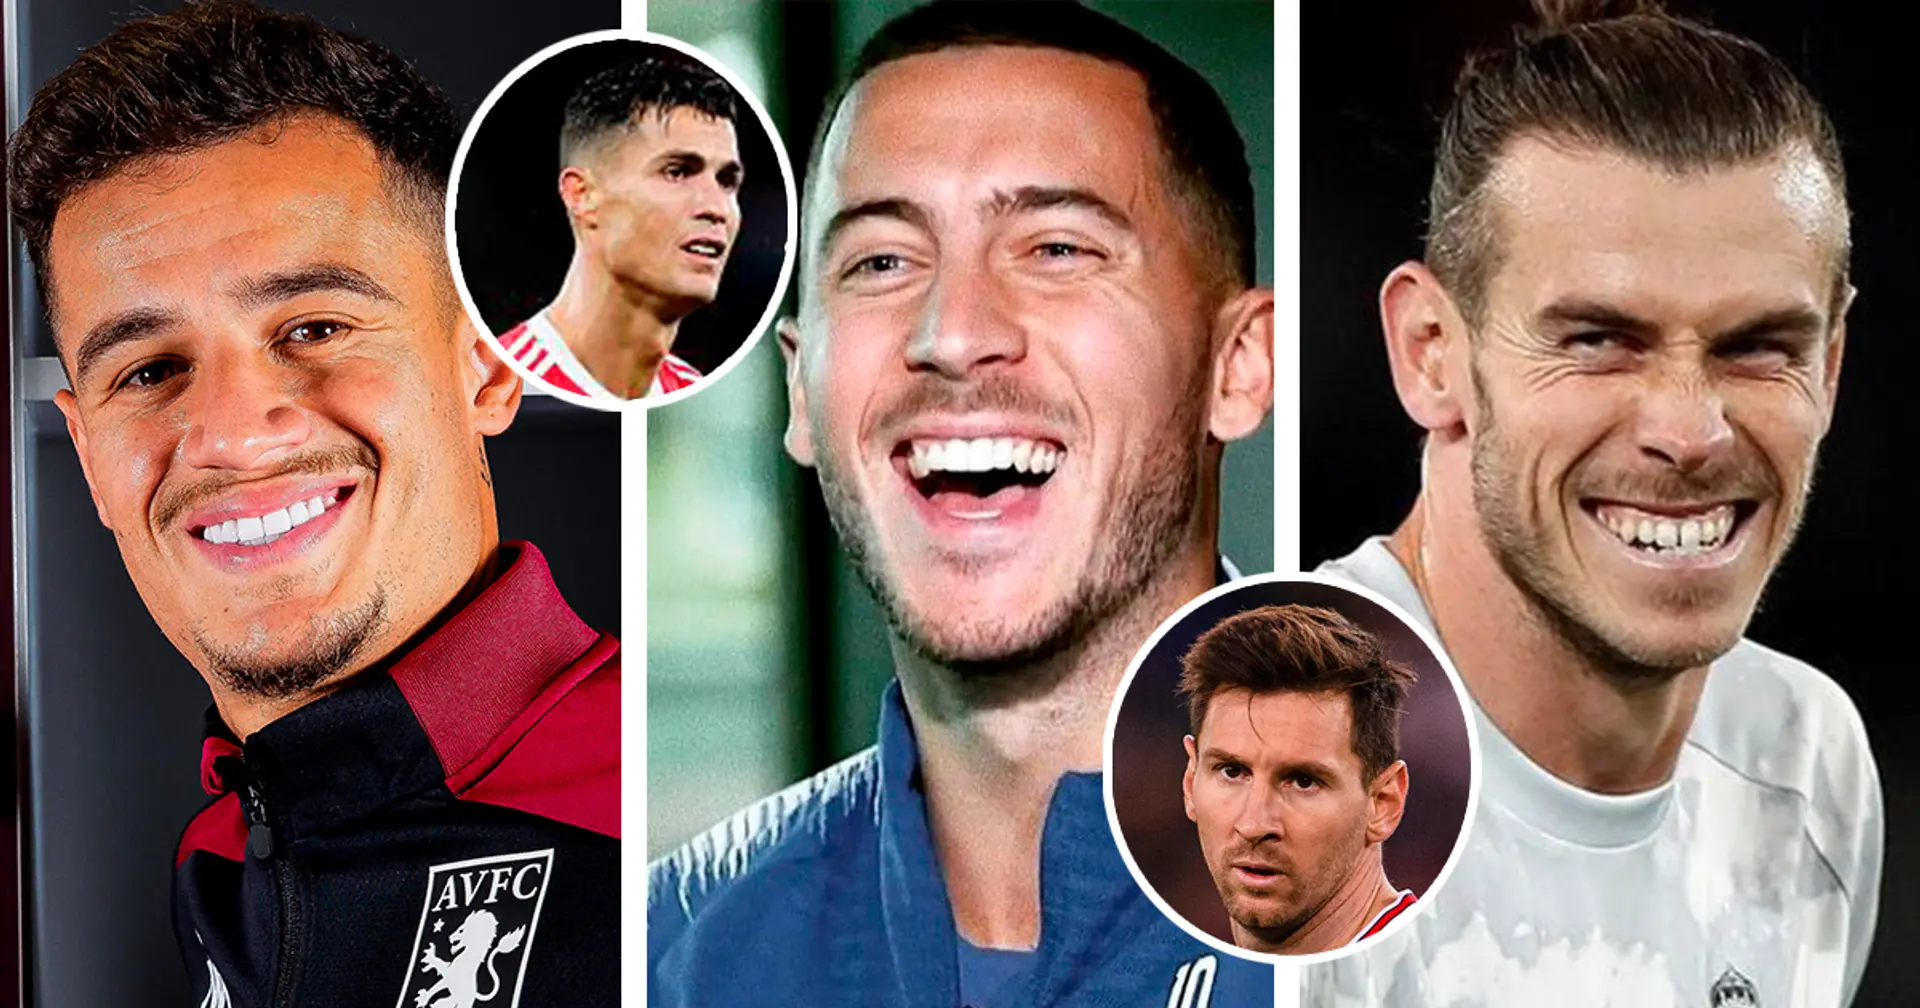 10 top highest paid players in the world in 2022: Ronaldo's only 6th, Bale earns more than Mbappe & De Bruyne